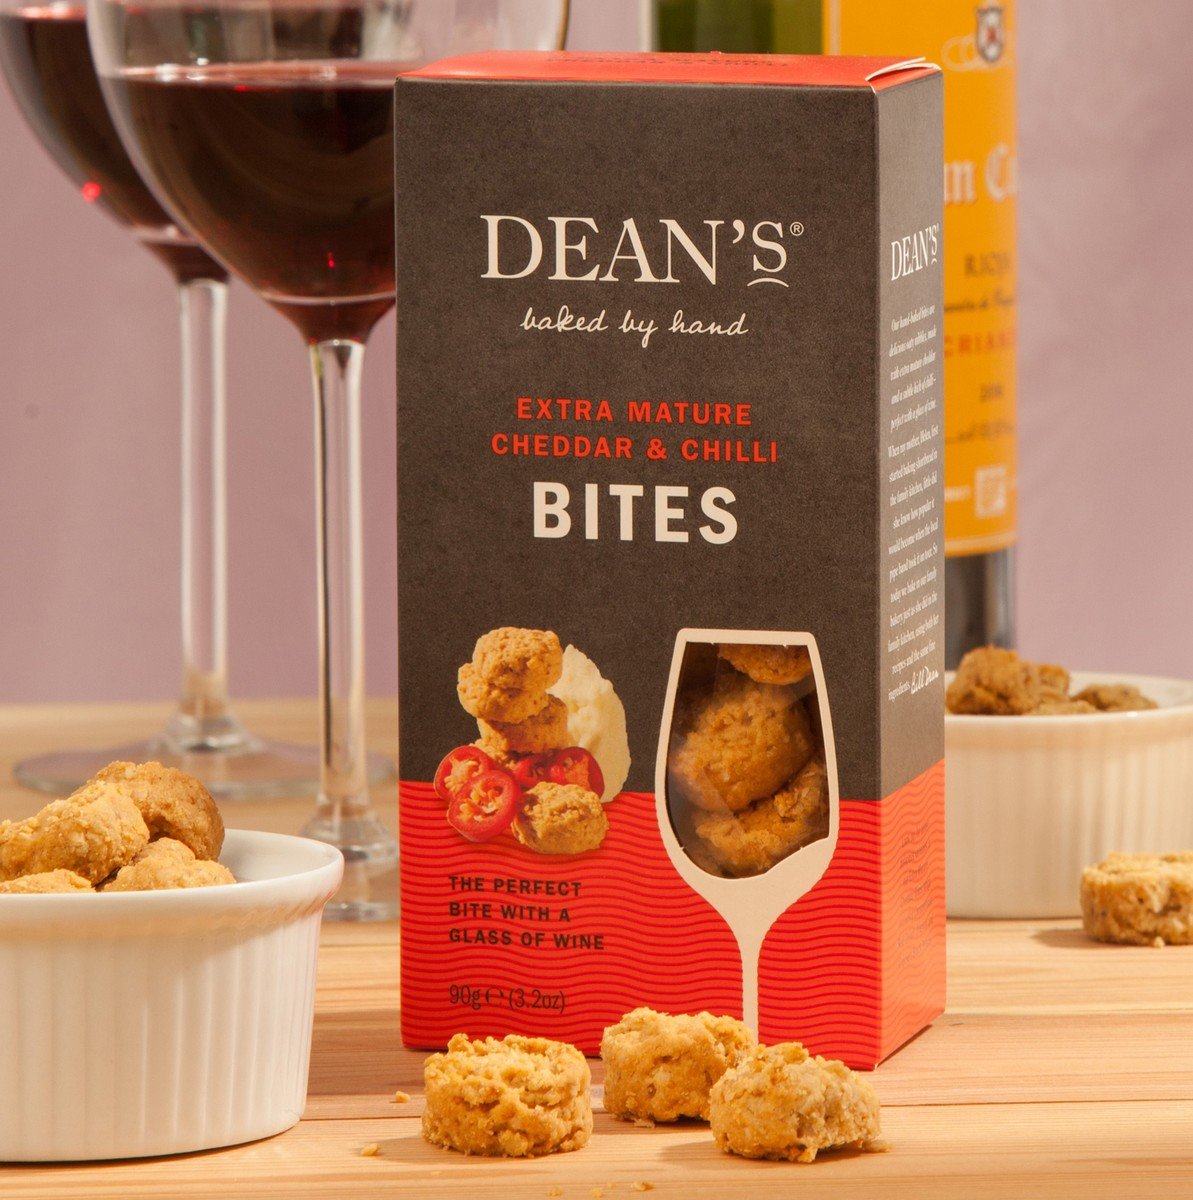 Buy the Extra Mature Cheddar & Chilli Bites 90g online at Dean's